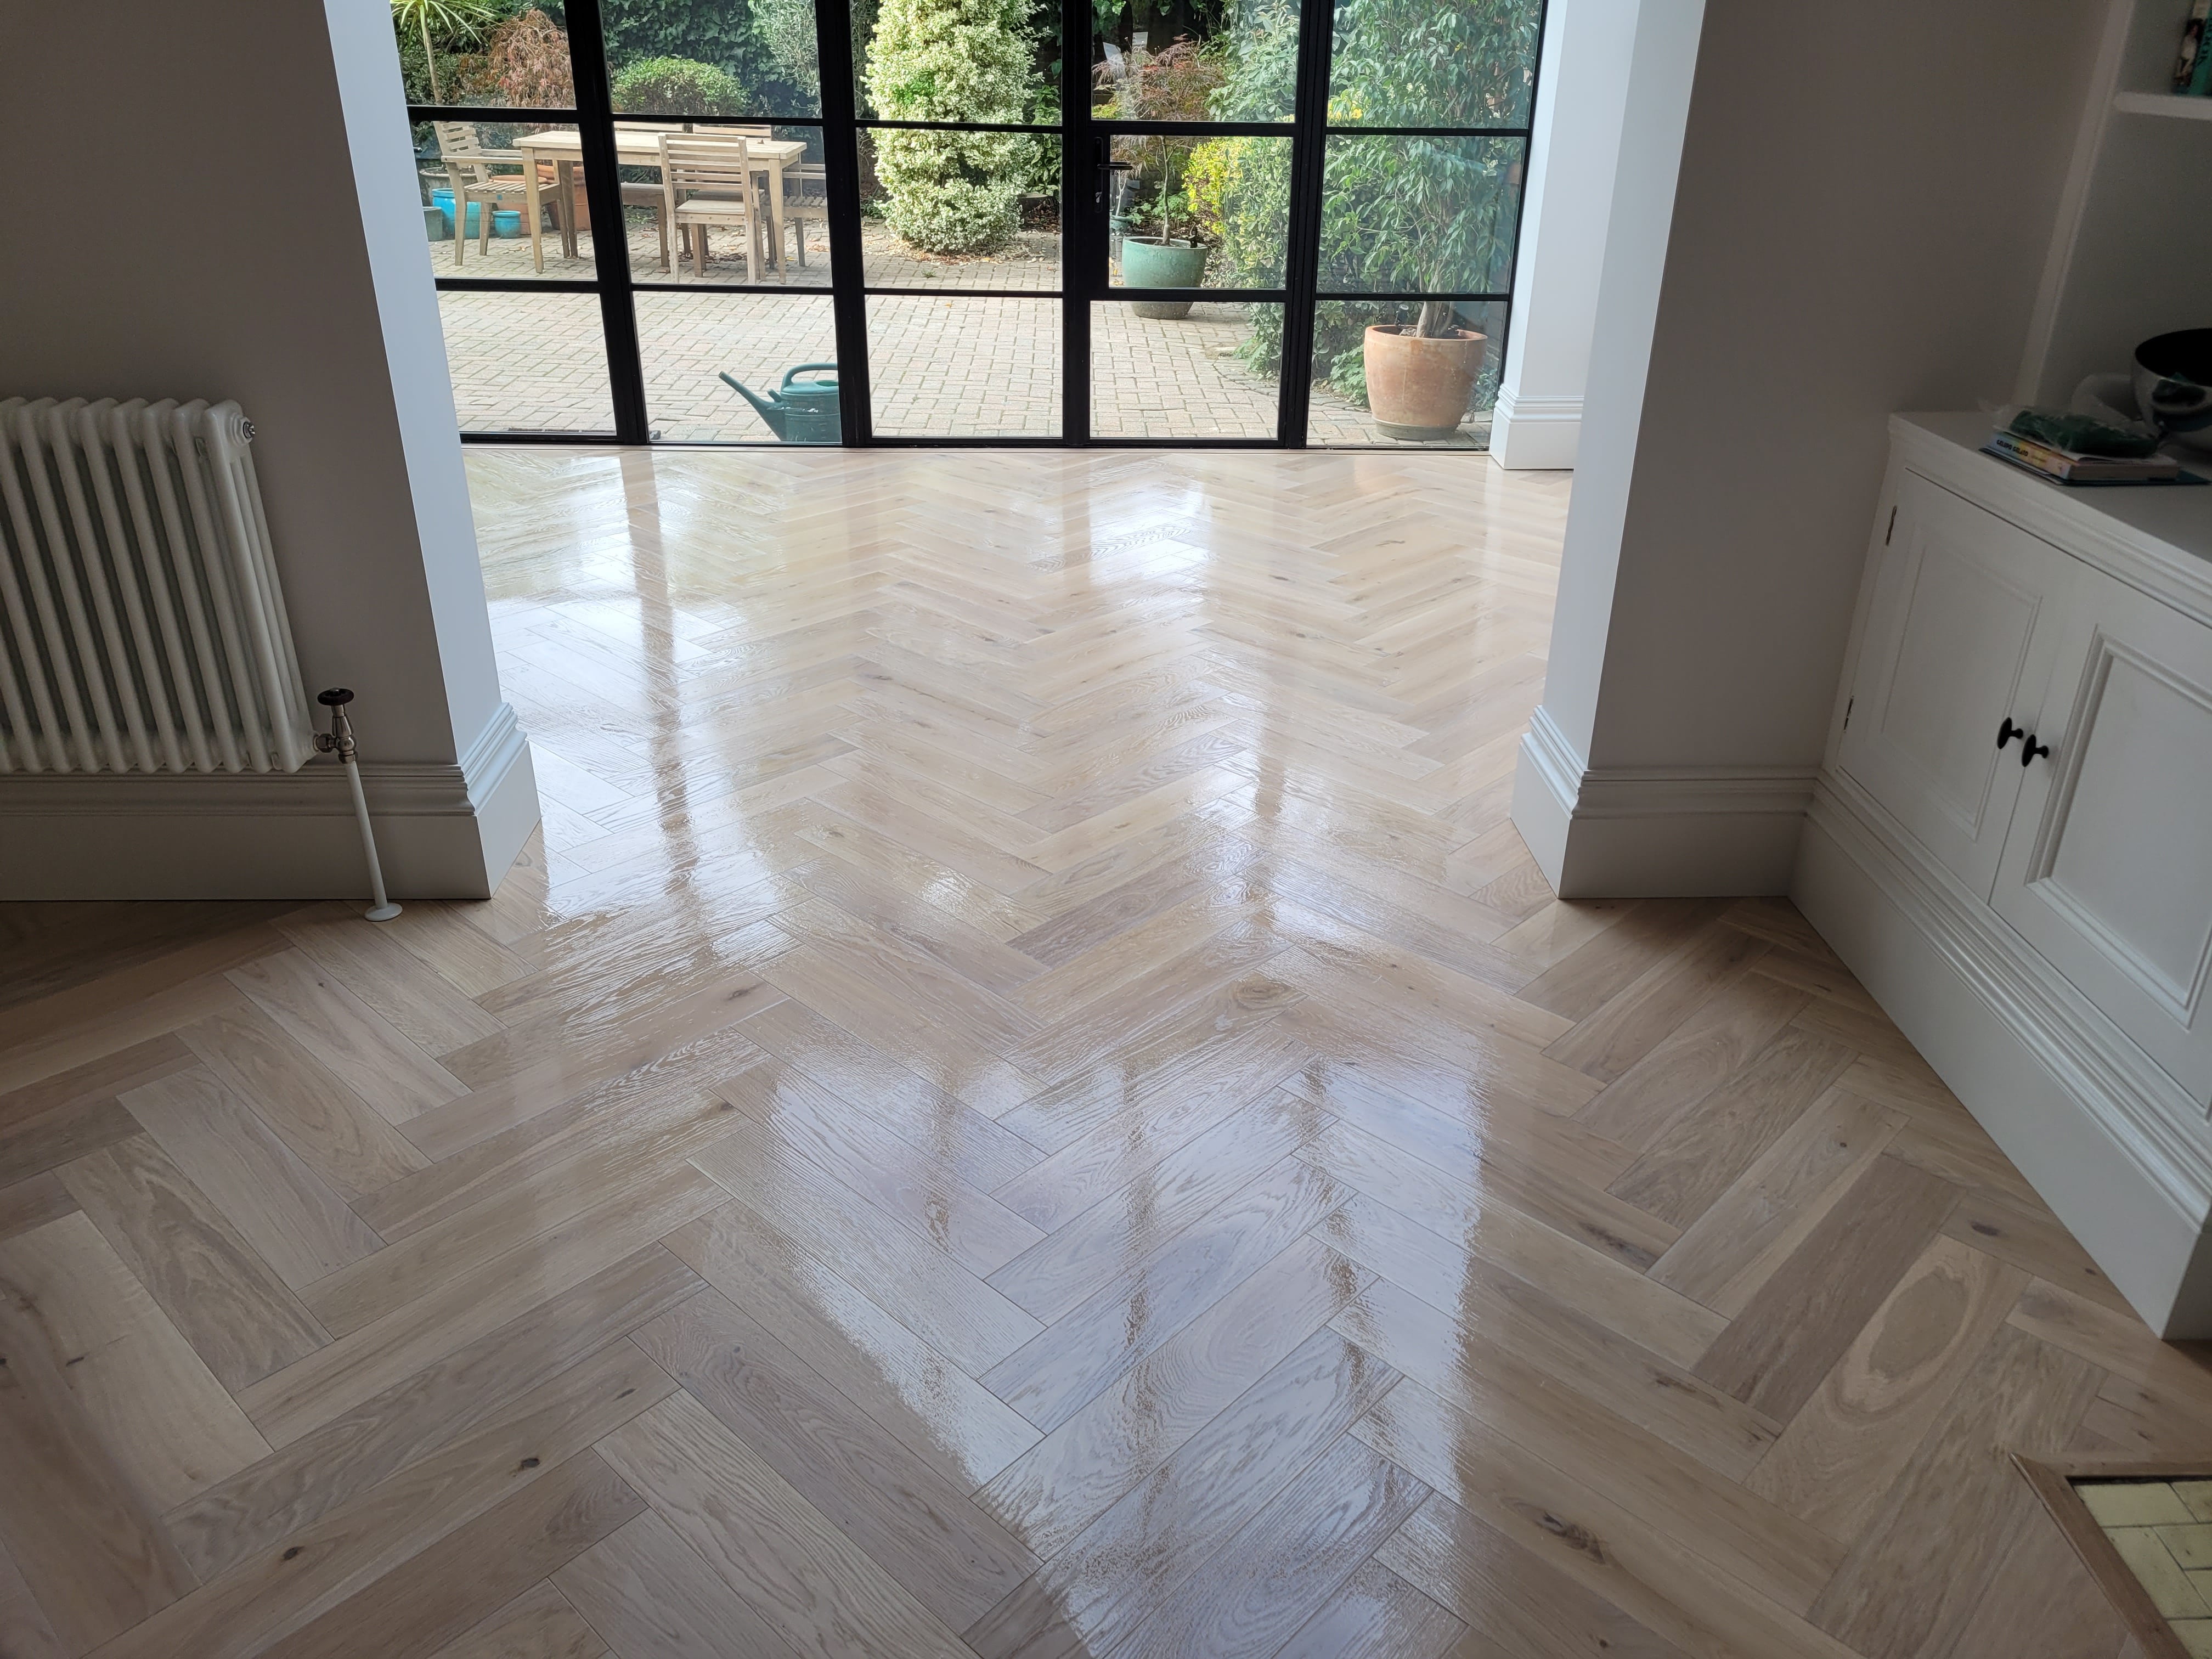 A Chevron parquet floor has been skillfully rejuvenated through a meticulous process of sanding, buffing, and whitewashing using Bona 2K Frost. 10% sheen matte lacquer, resulting in a stunning, long-lasting finish.